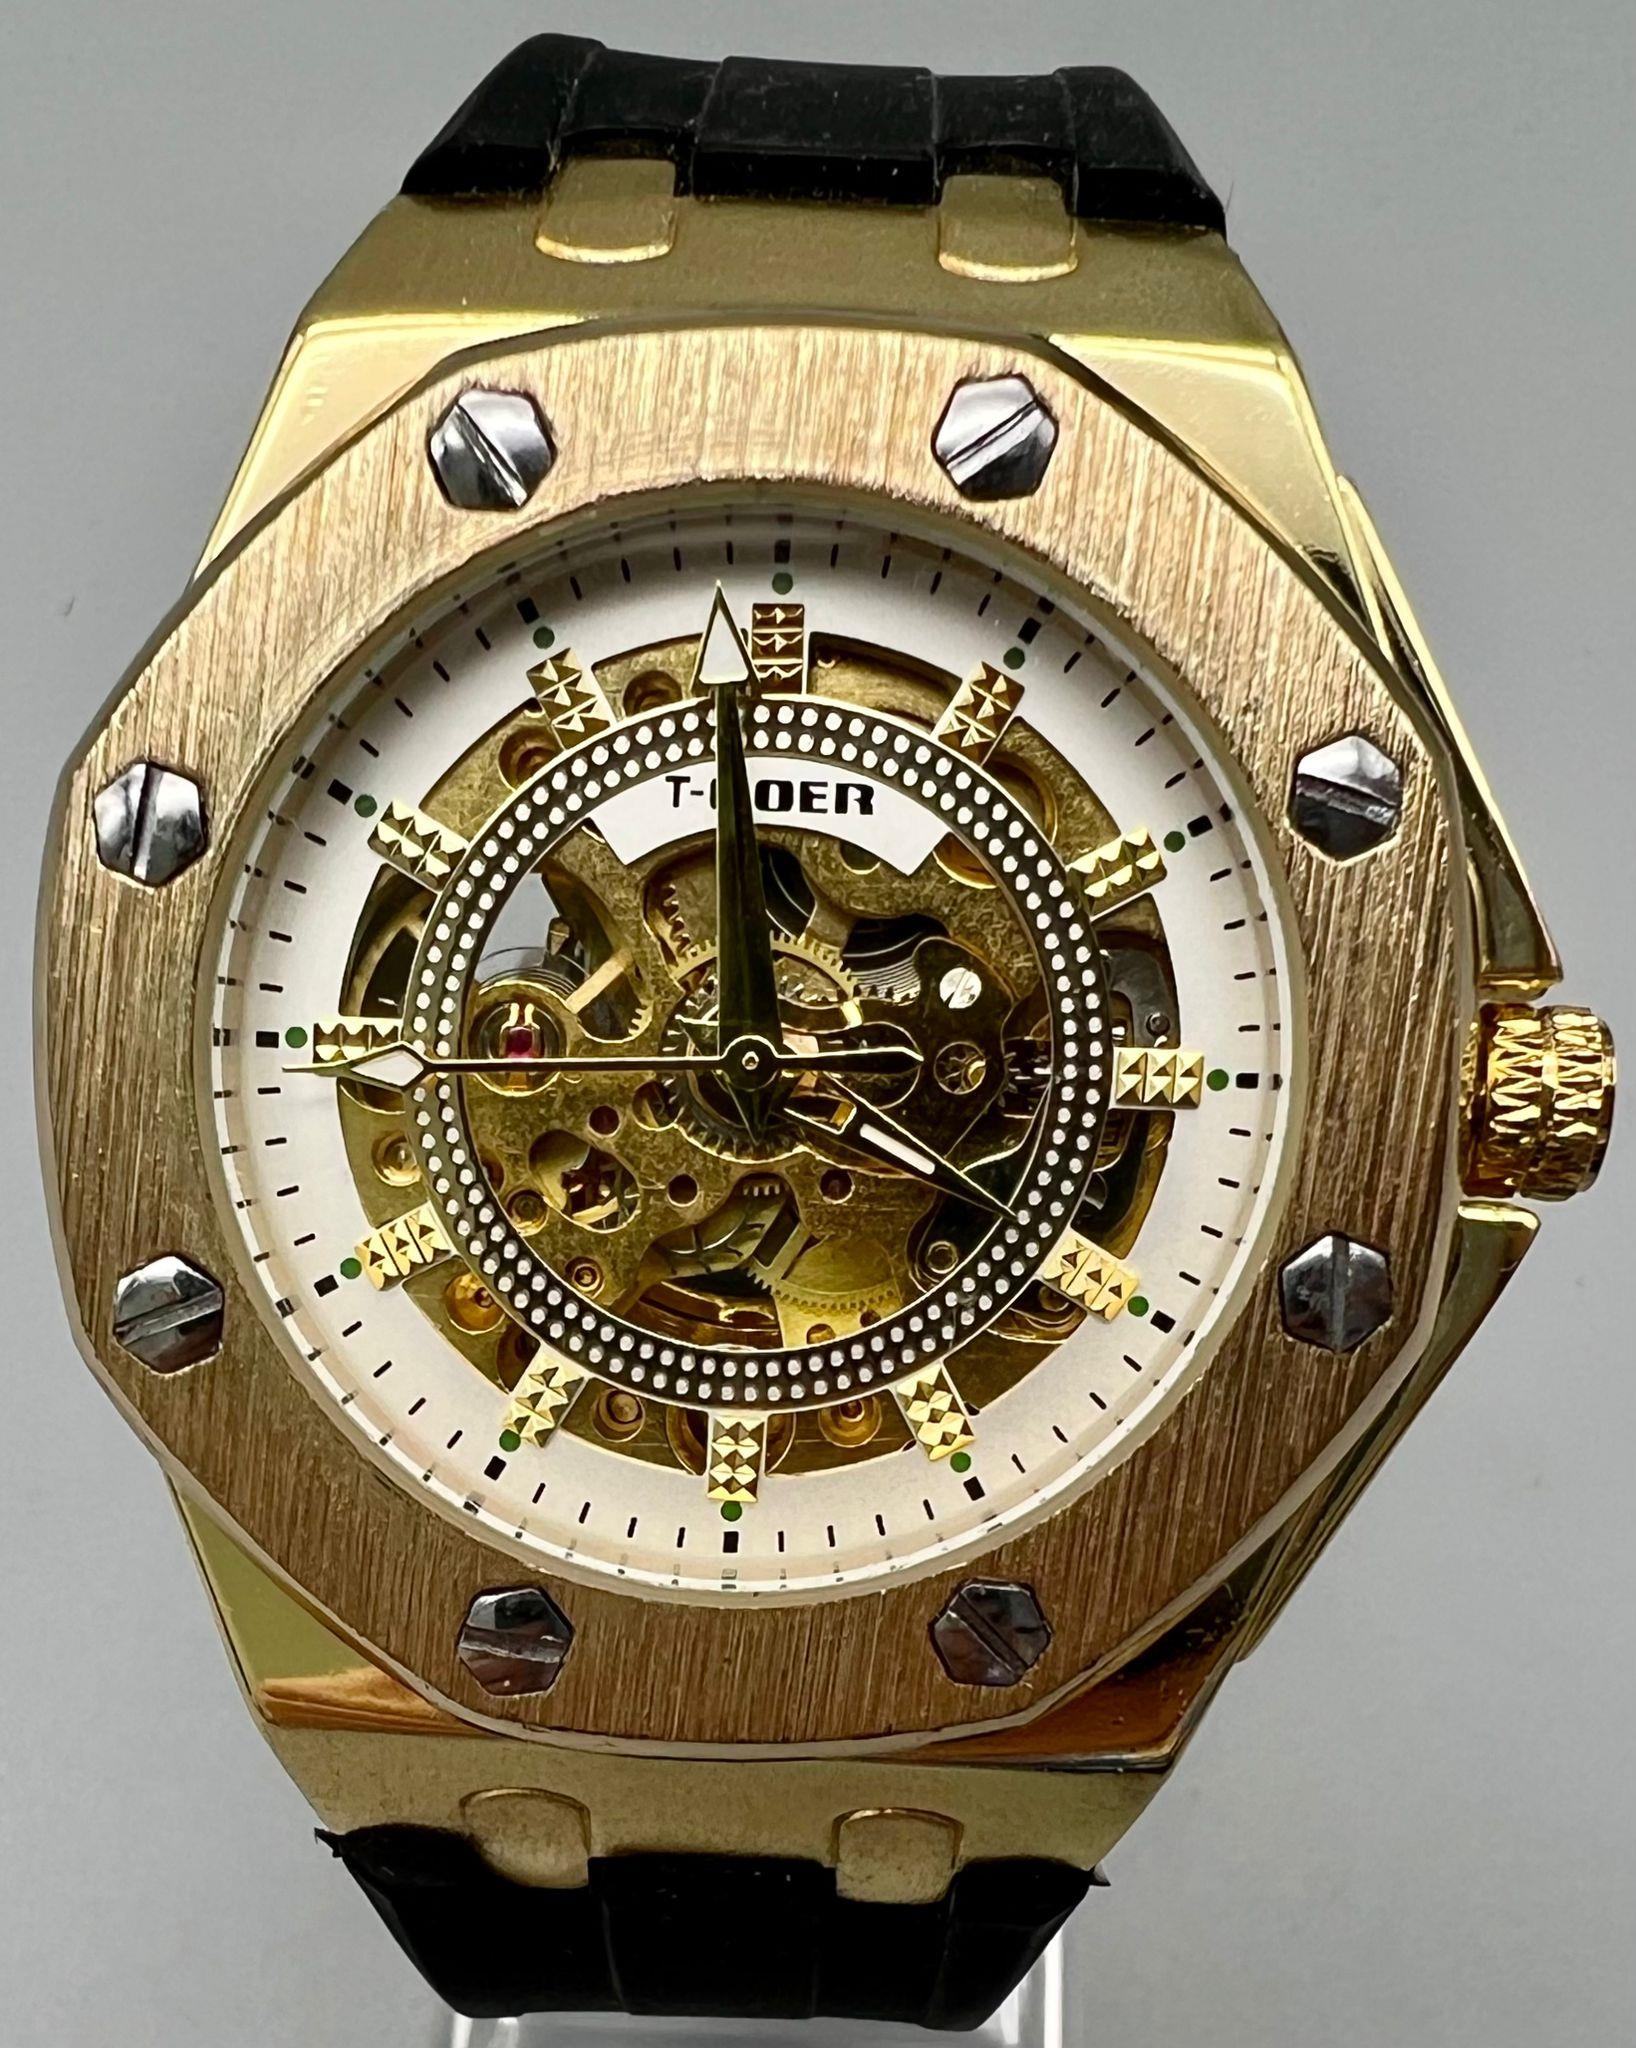 A Men’s Royal Oak Offshore Style Automatic Skeleton Watch, Rubber Dive Strap 46mm Case including - Image 2 of 3